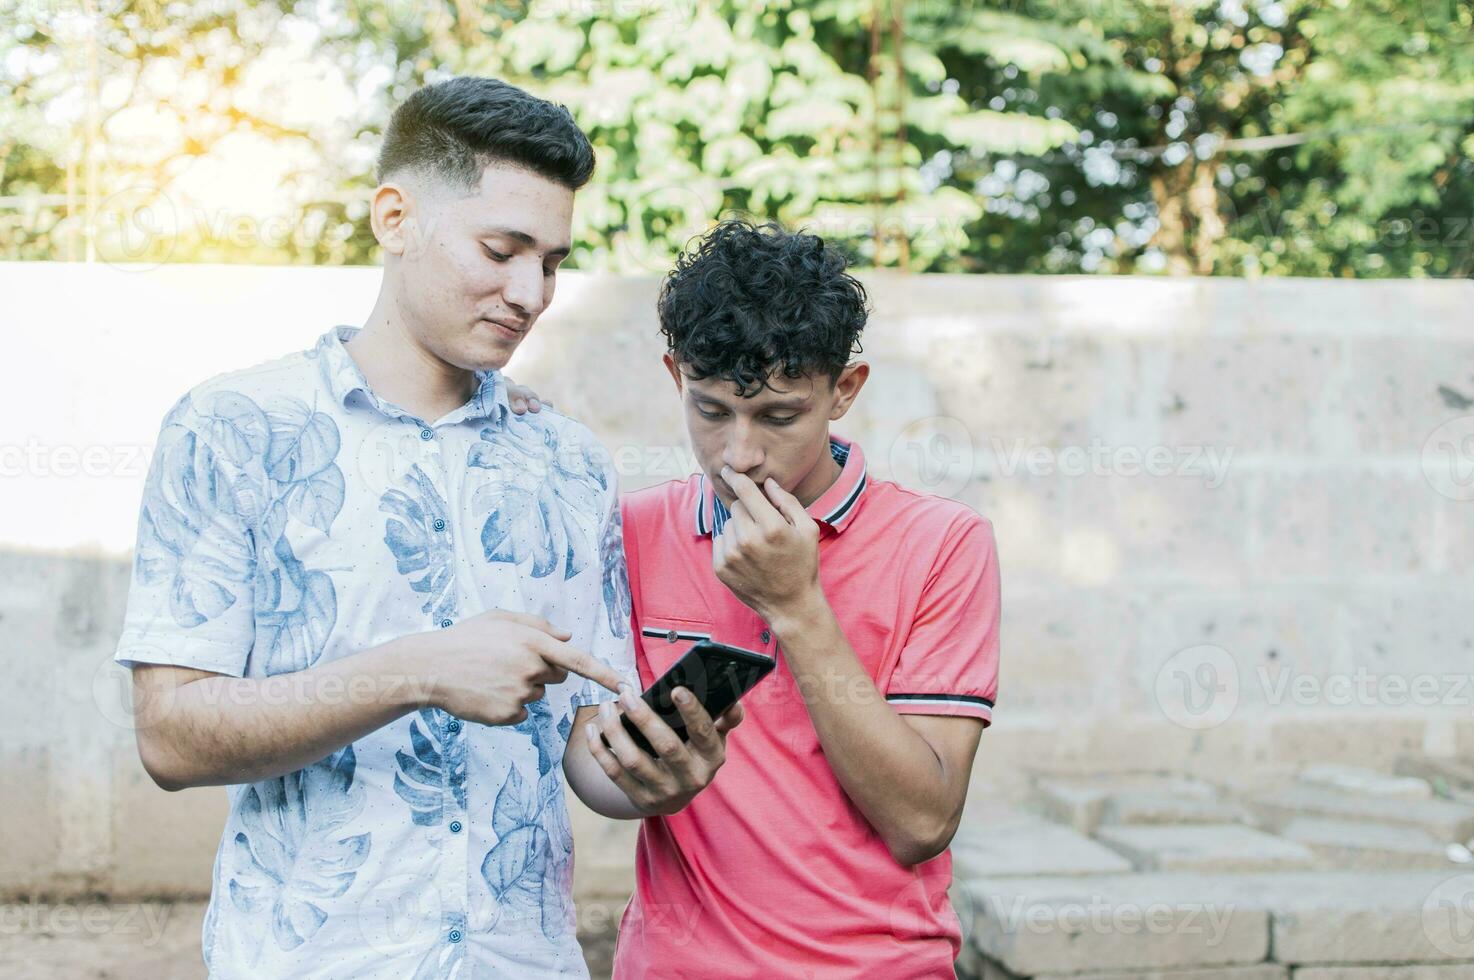 A guy showing his cell phone to another guy, Teenager explaining with his cell phone to another guy, A young man explaining with his cell phone to a young man photo